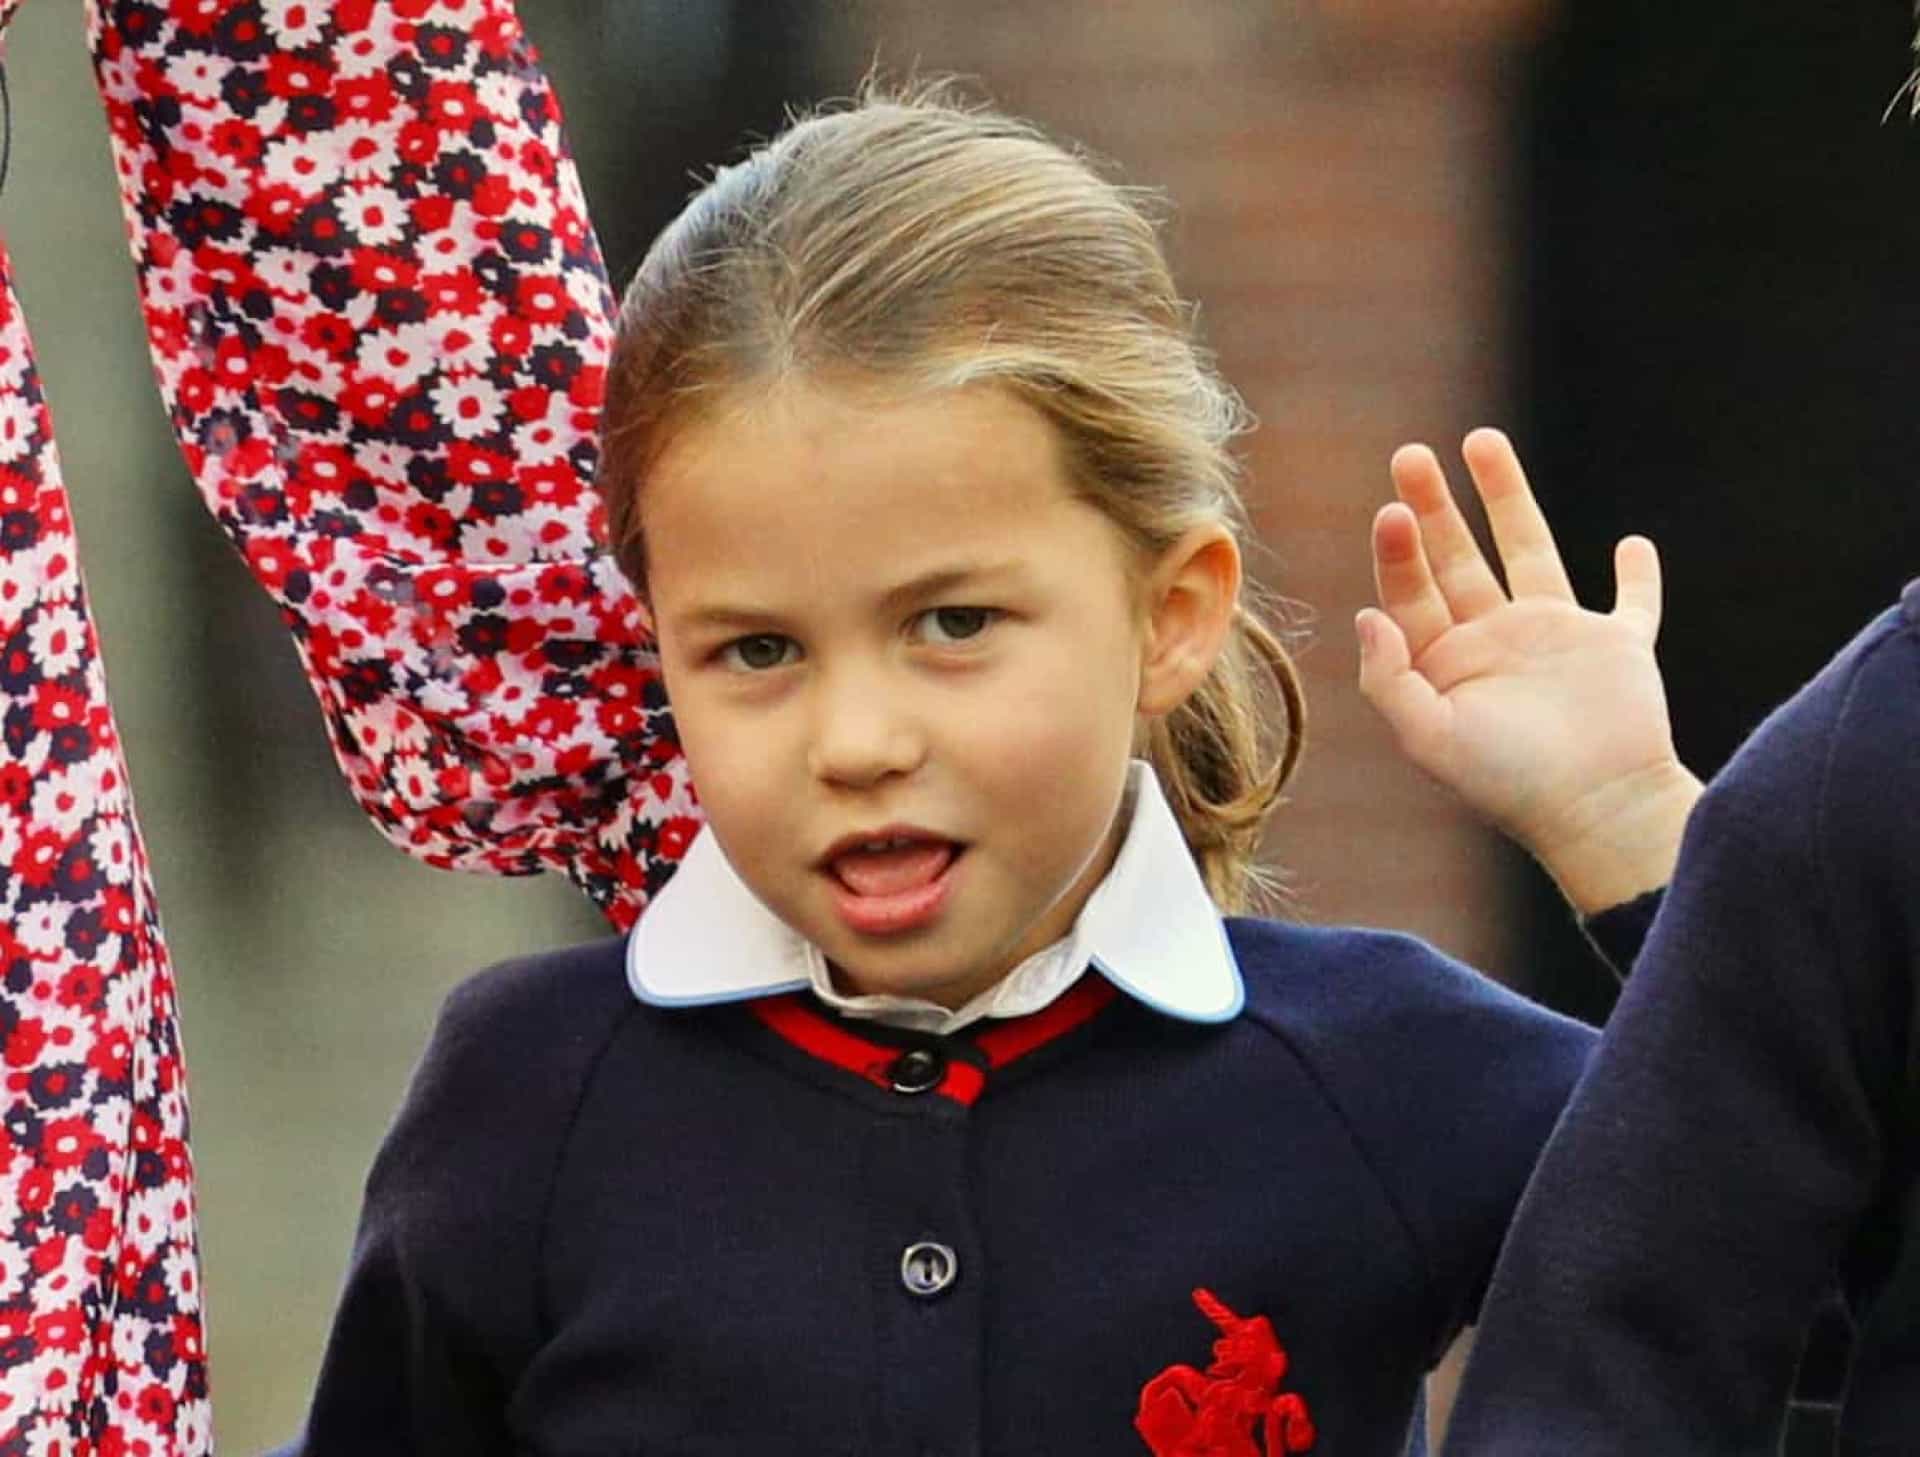 <p>Princess Charlotte waves as she arrives for her first day of school at Thomas's Battersea Prep School in London on September 5, 2019.</p>